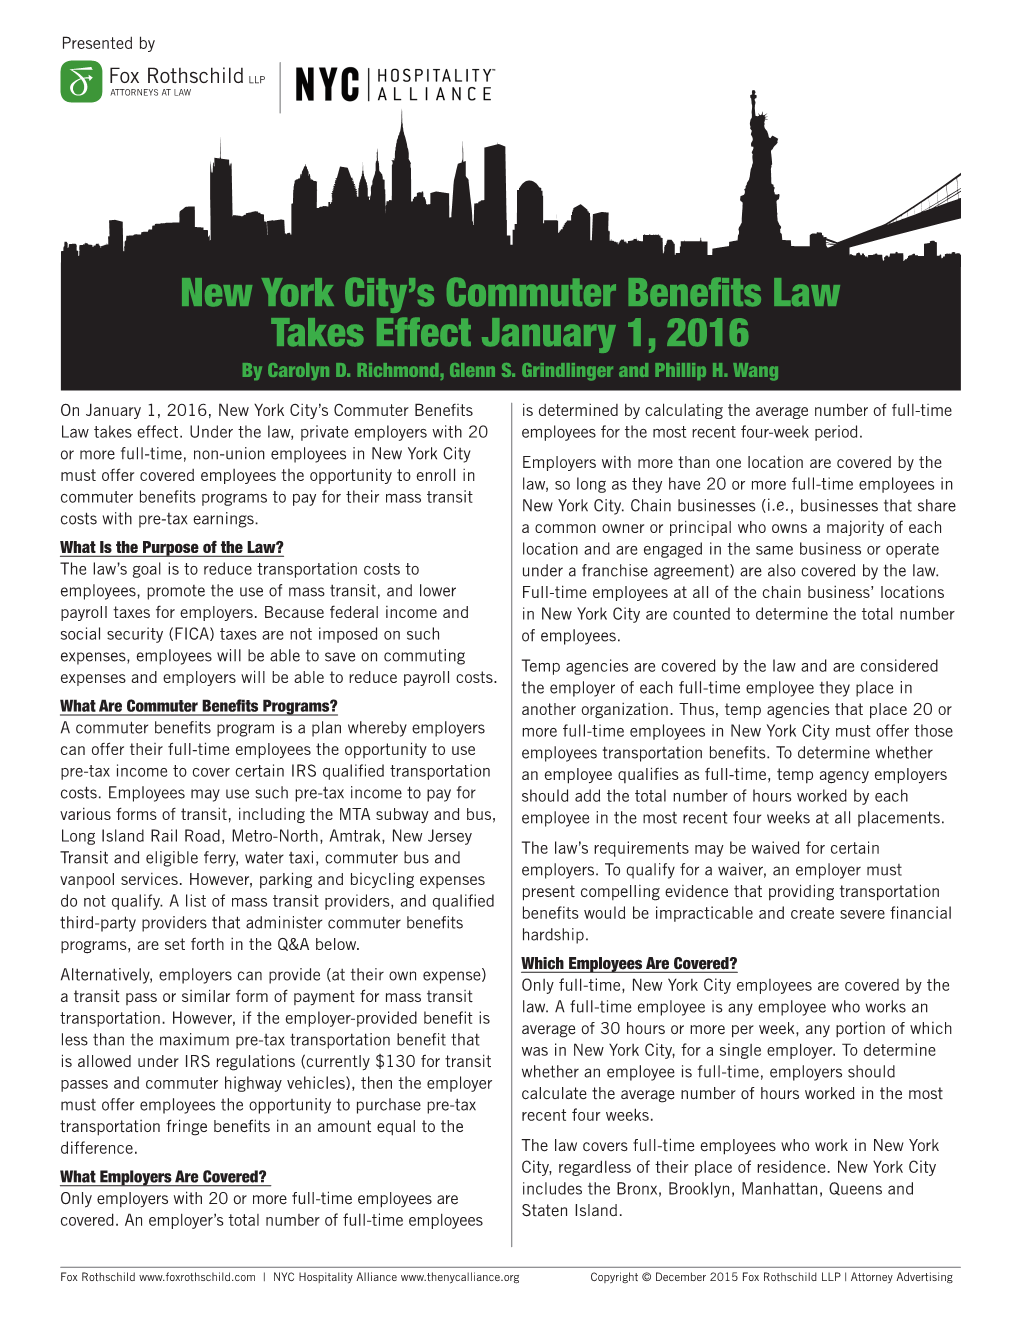 New York City's Commuter Benefits Law Takes Effect January 1, 2016